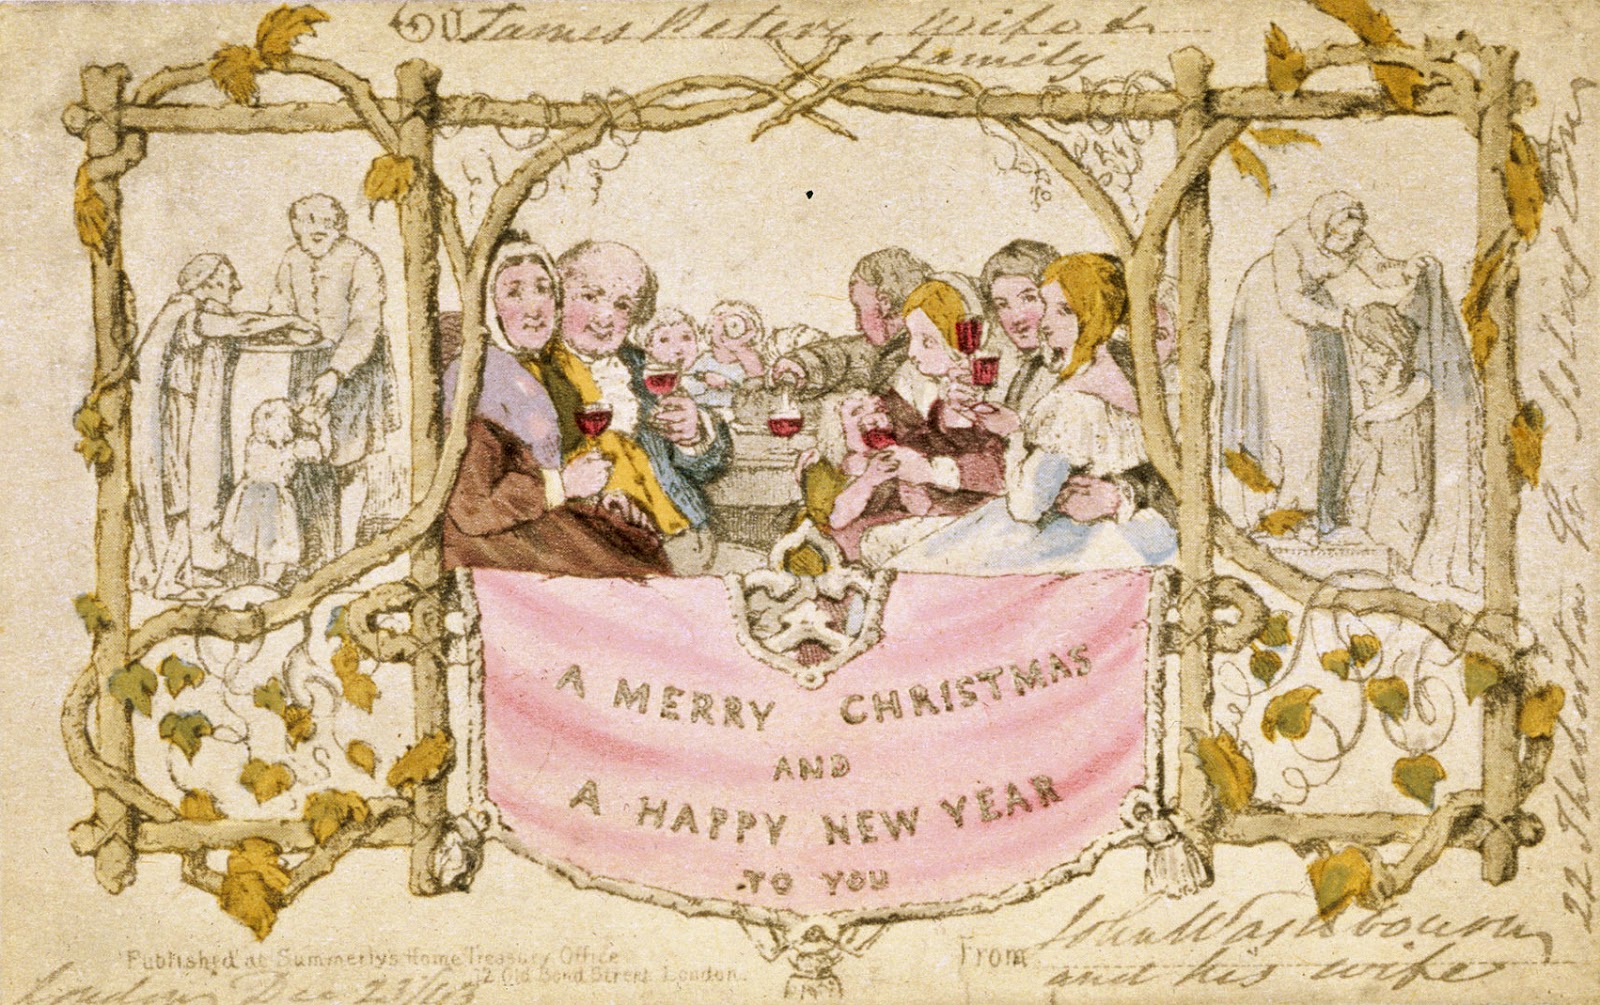 in-1843-inventor-henry-cole-created-the-very-first-christmas-card